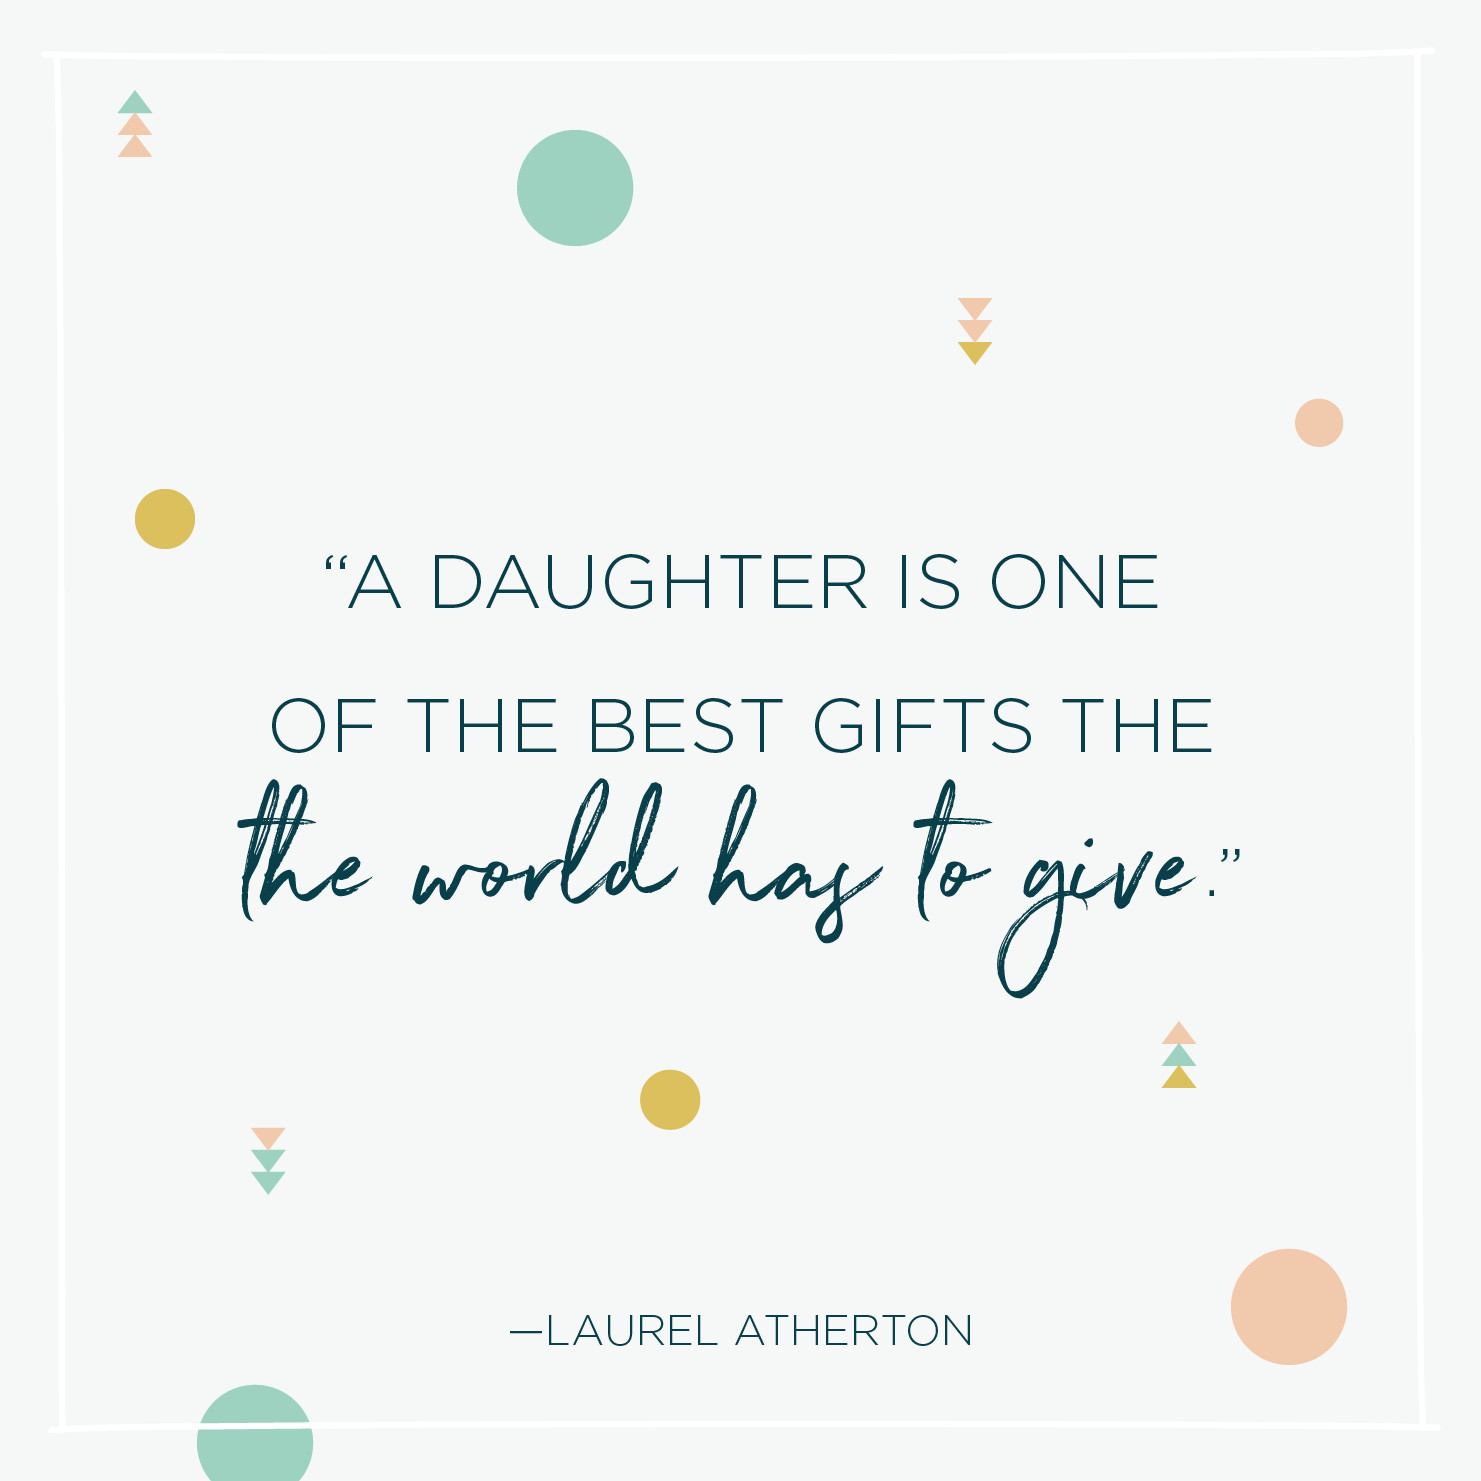 Quotes To Baby Girl
 84 Inspirational Baby Quotes and Sayings